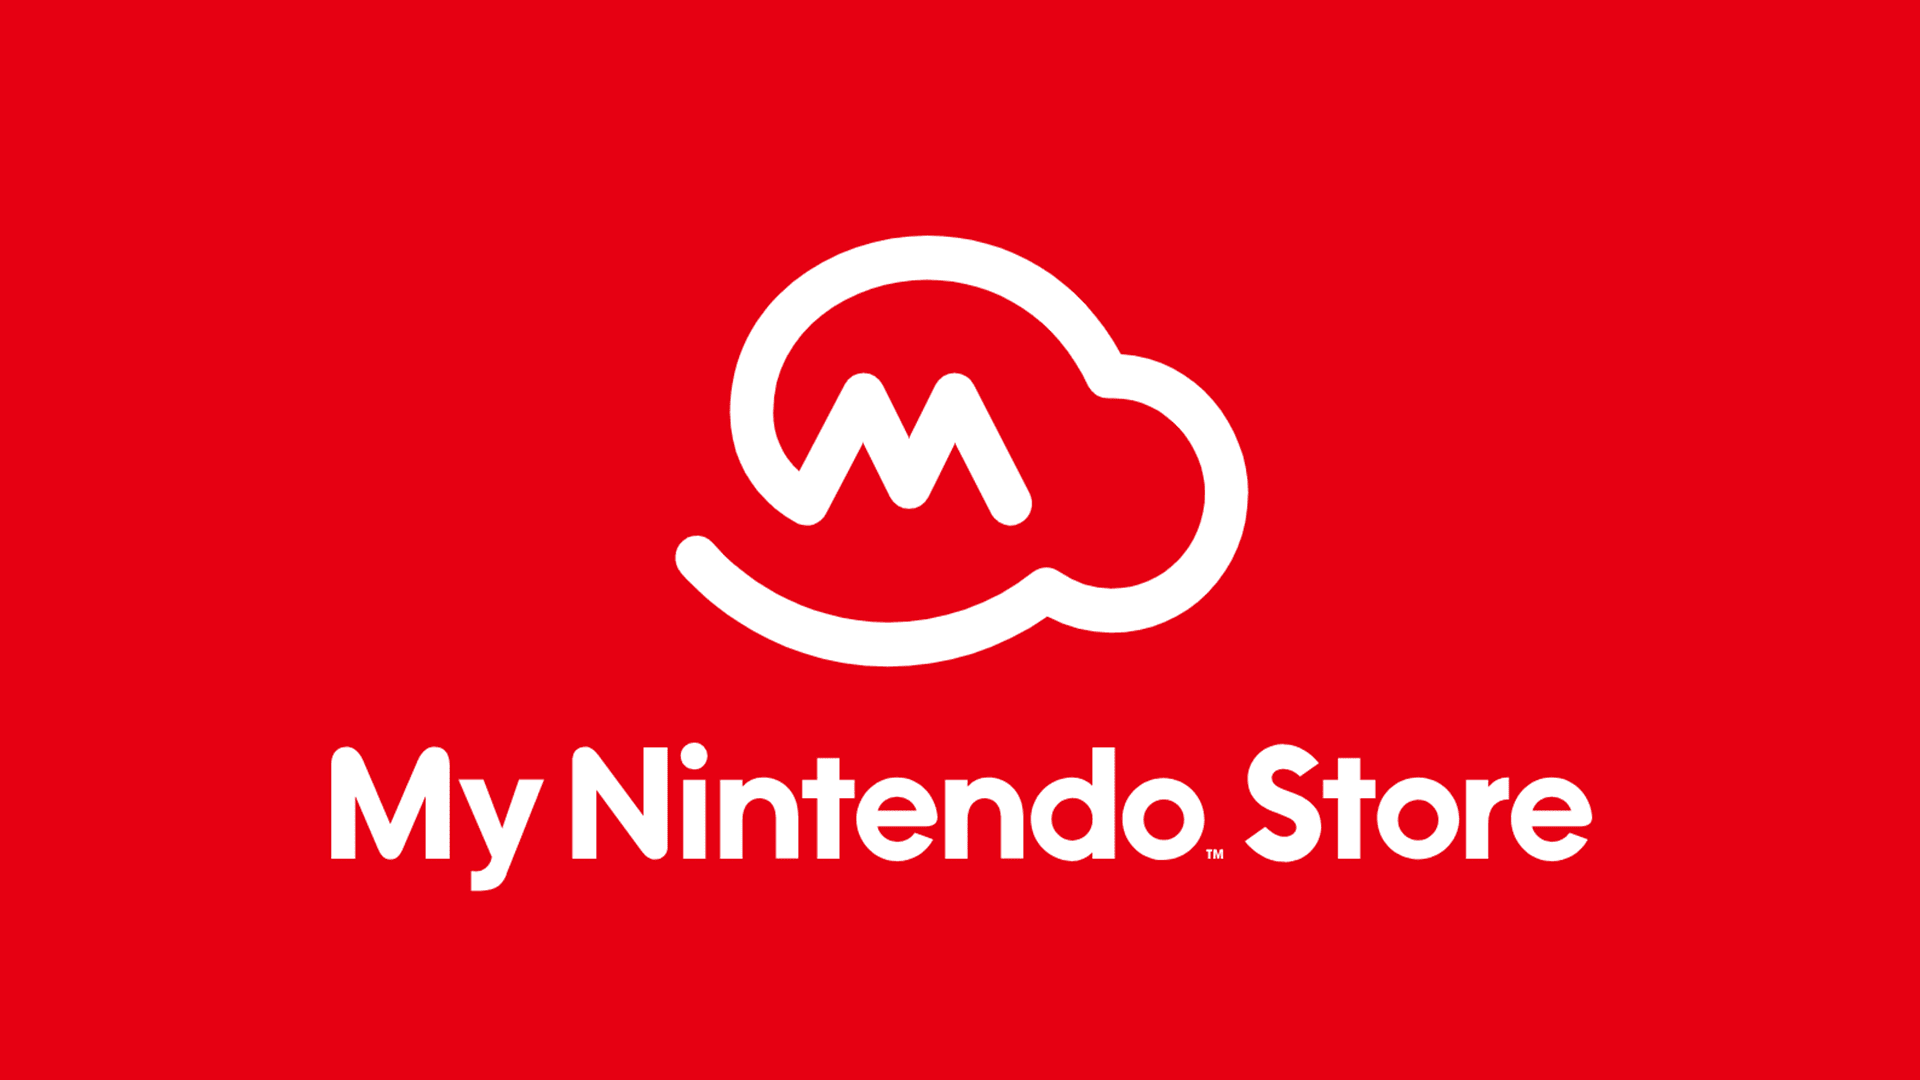 Click here to learn more about this offer at the My Nintendo Store website